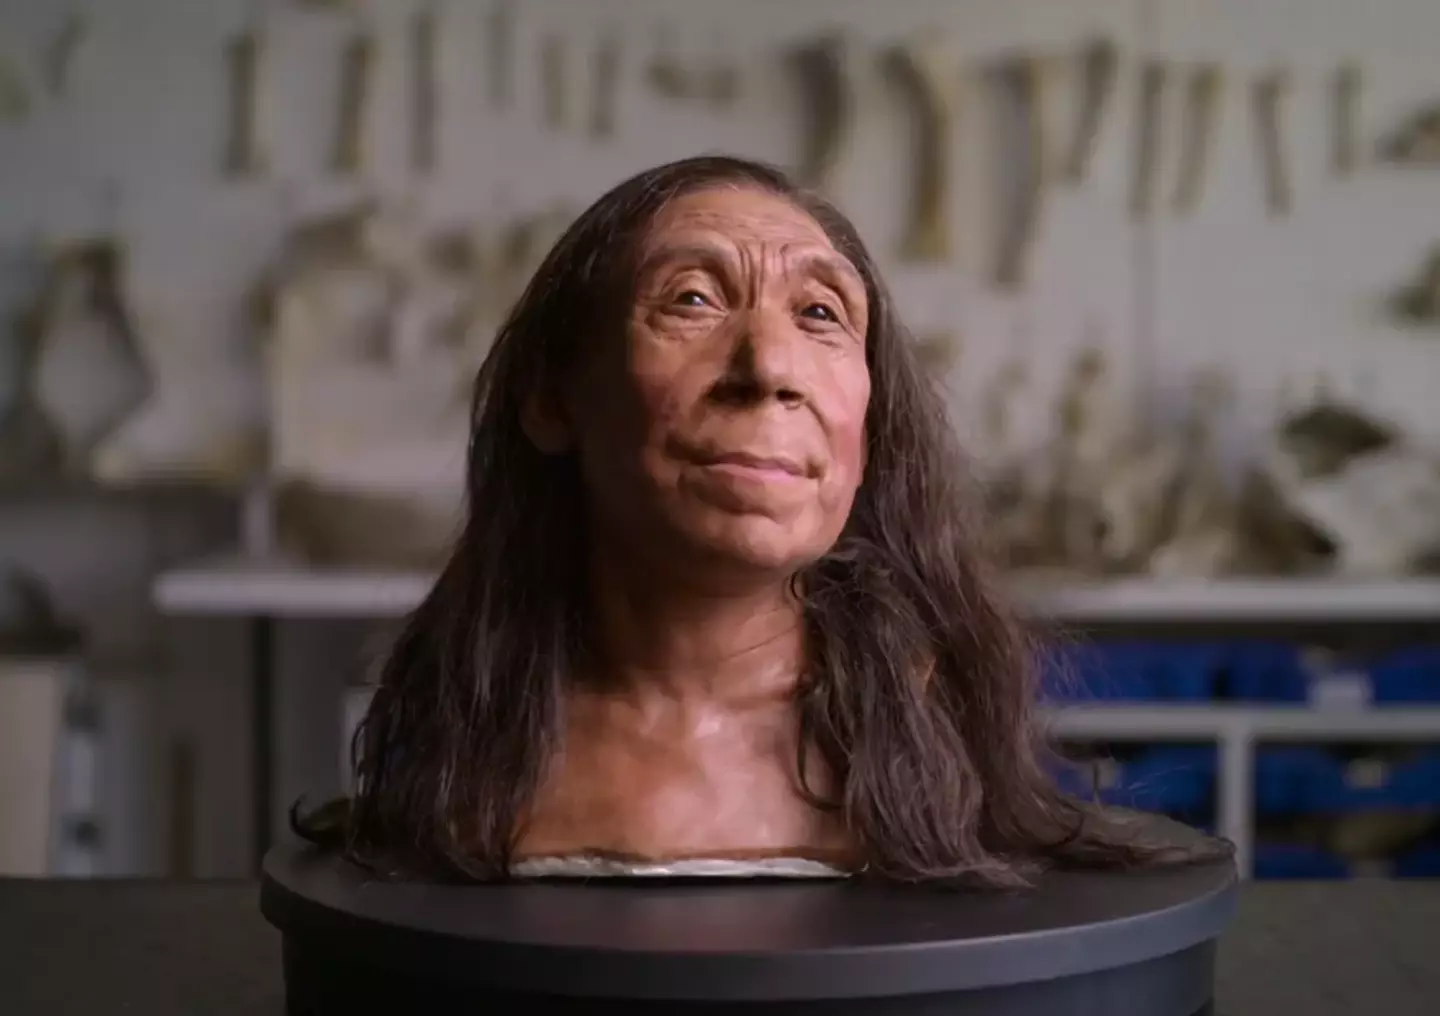 Scientists reconstructed her face. (Netflix)